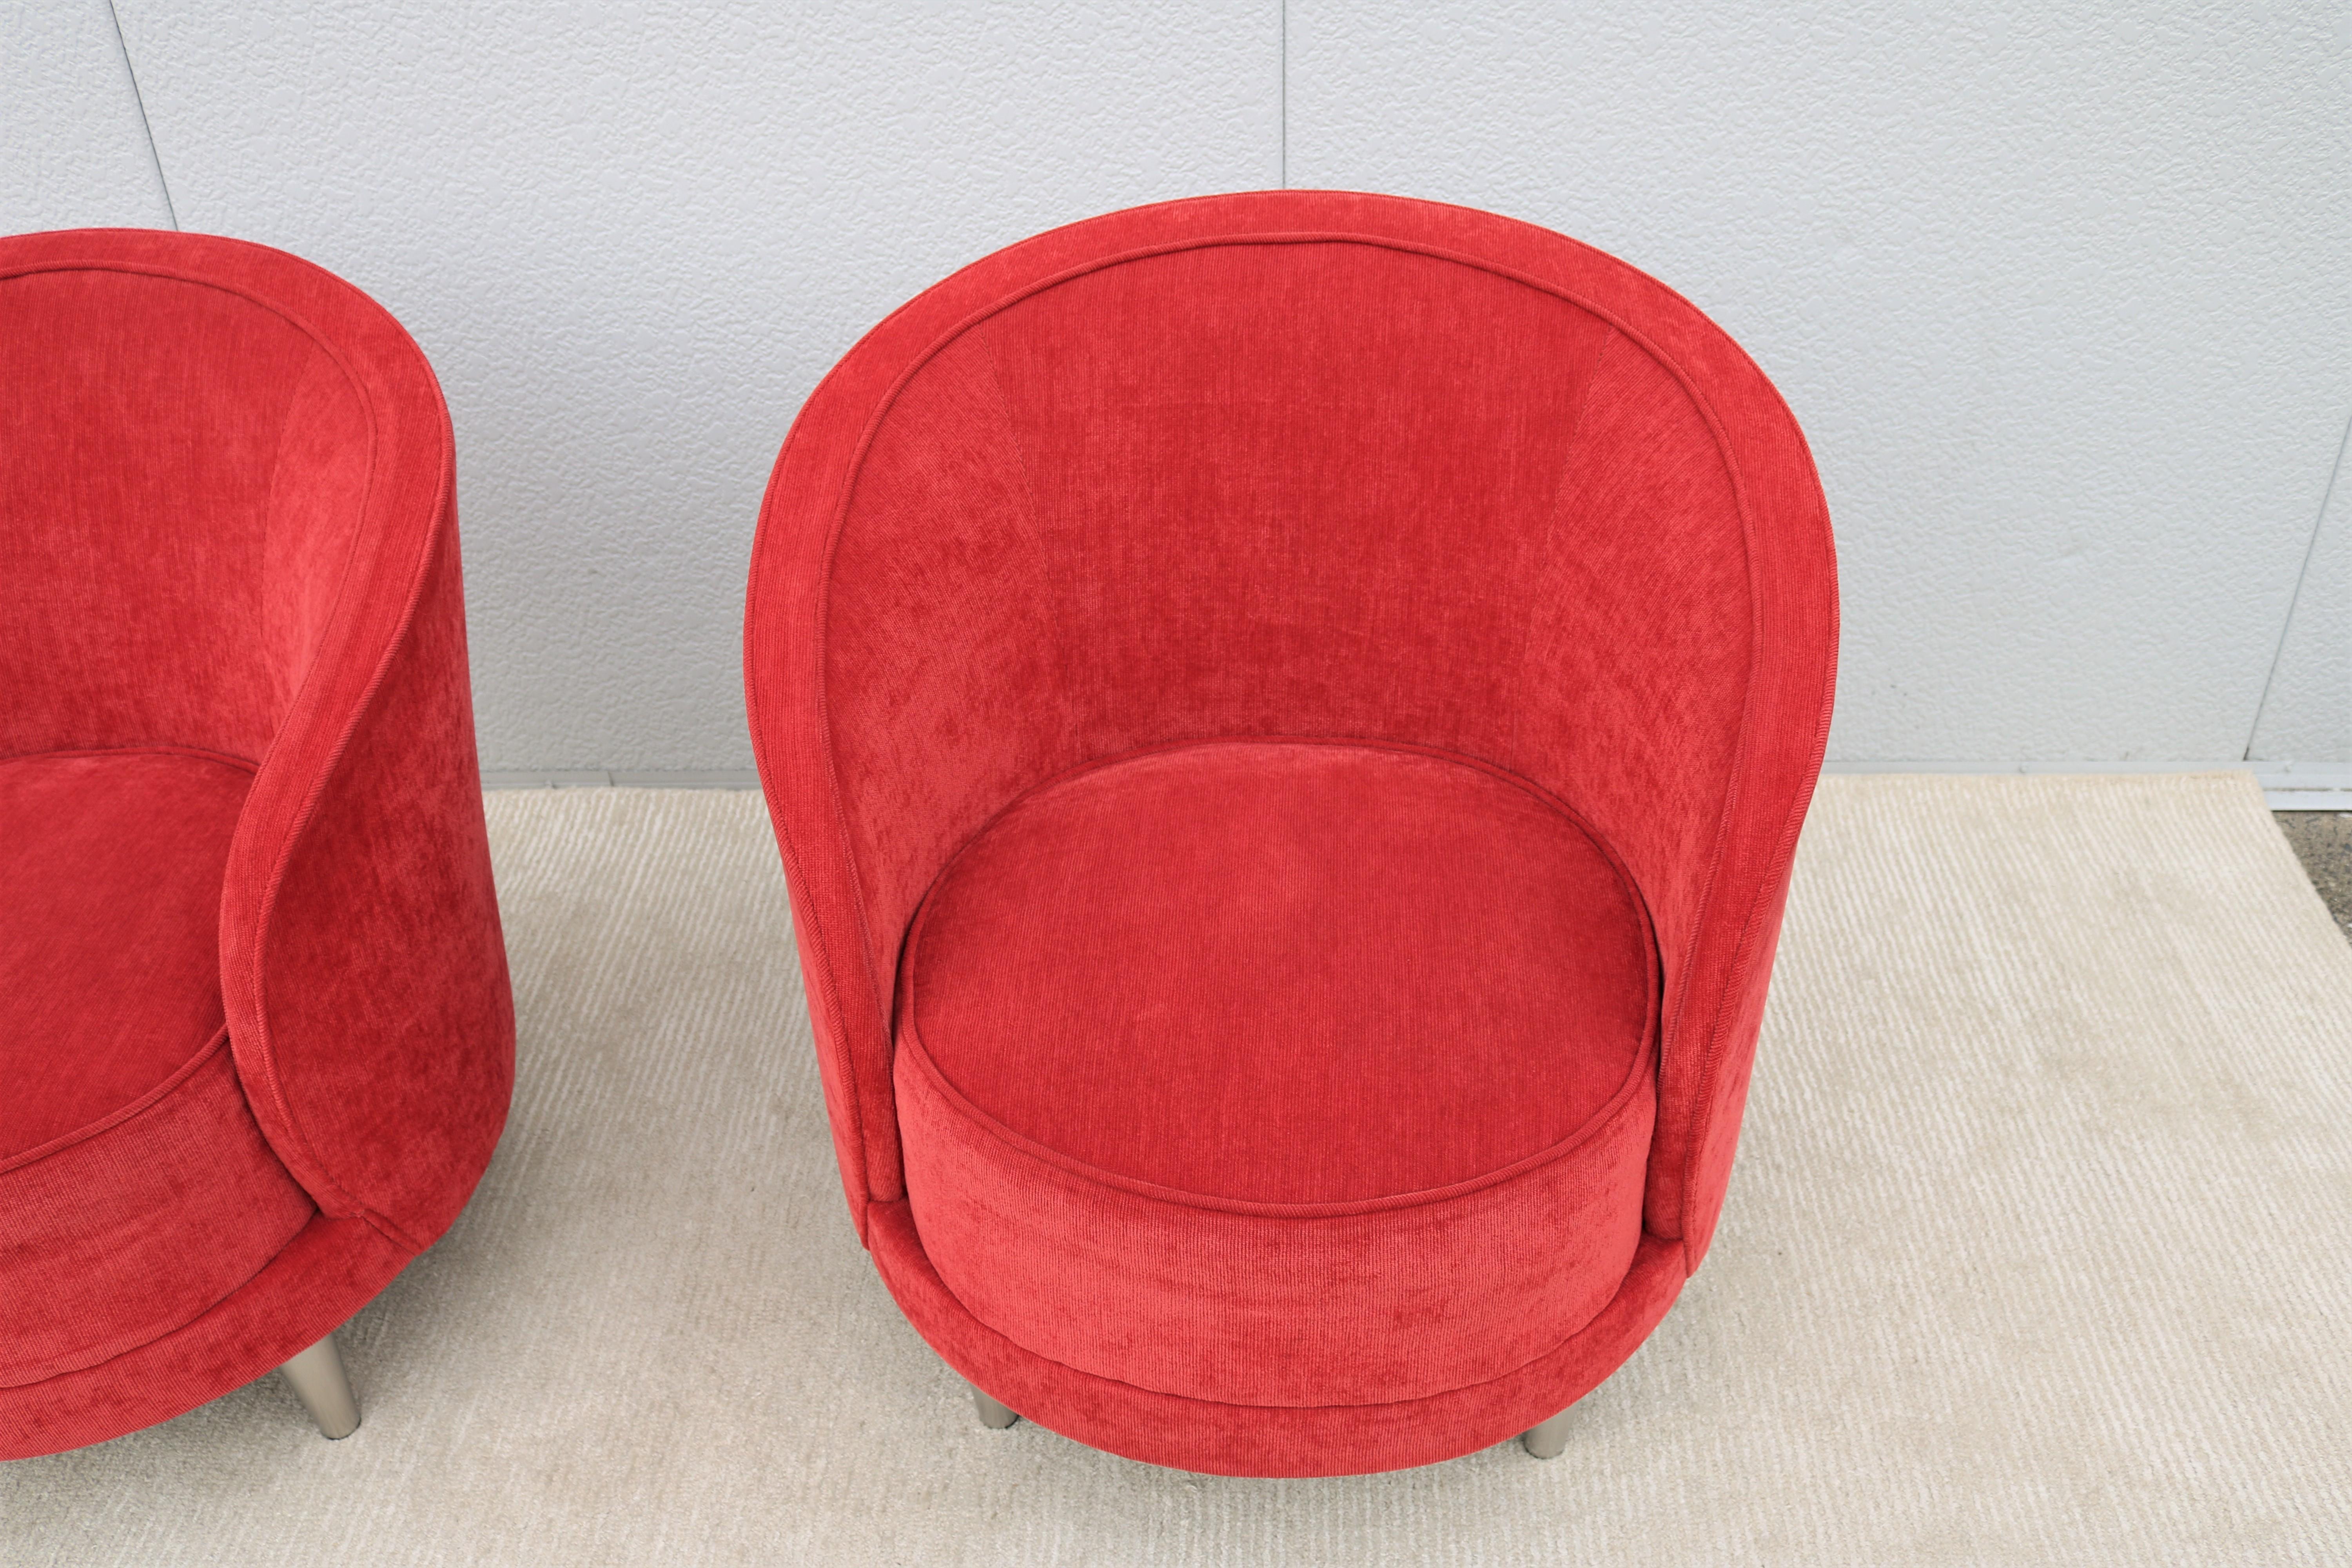 Contemporary Modern Martin Brattrud Kinsale Red Barrel Lounge Chairs, a Pair For Sale 8